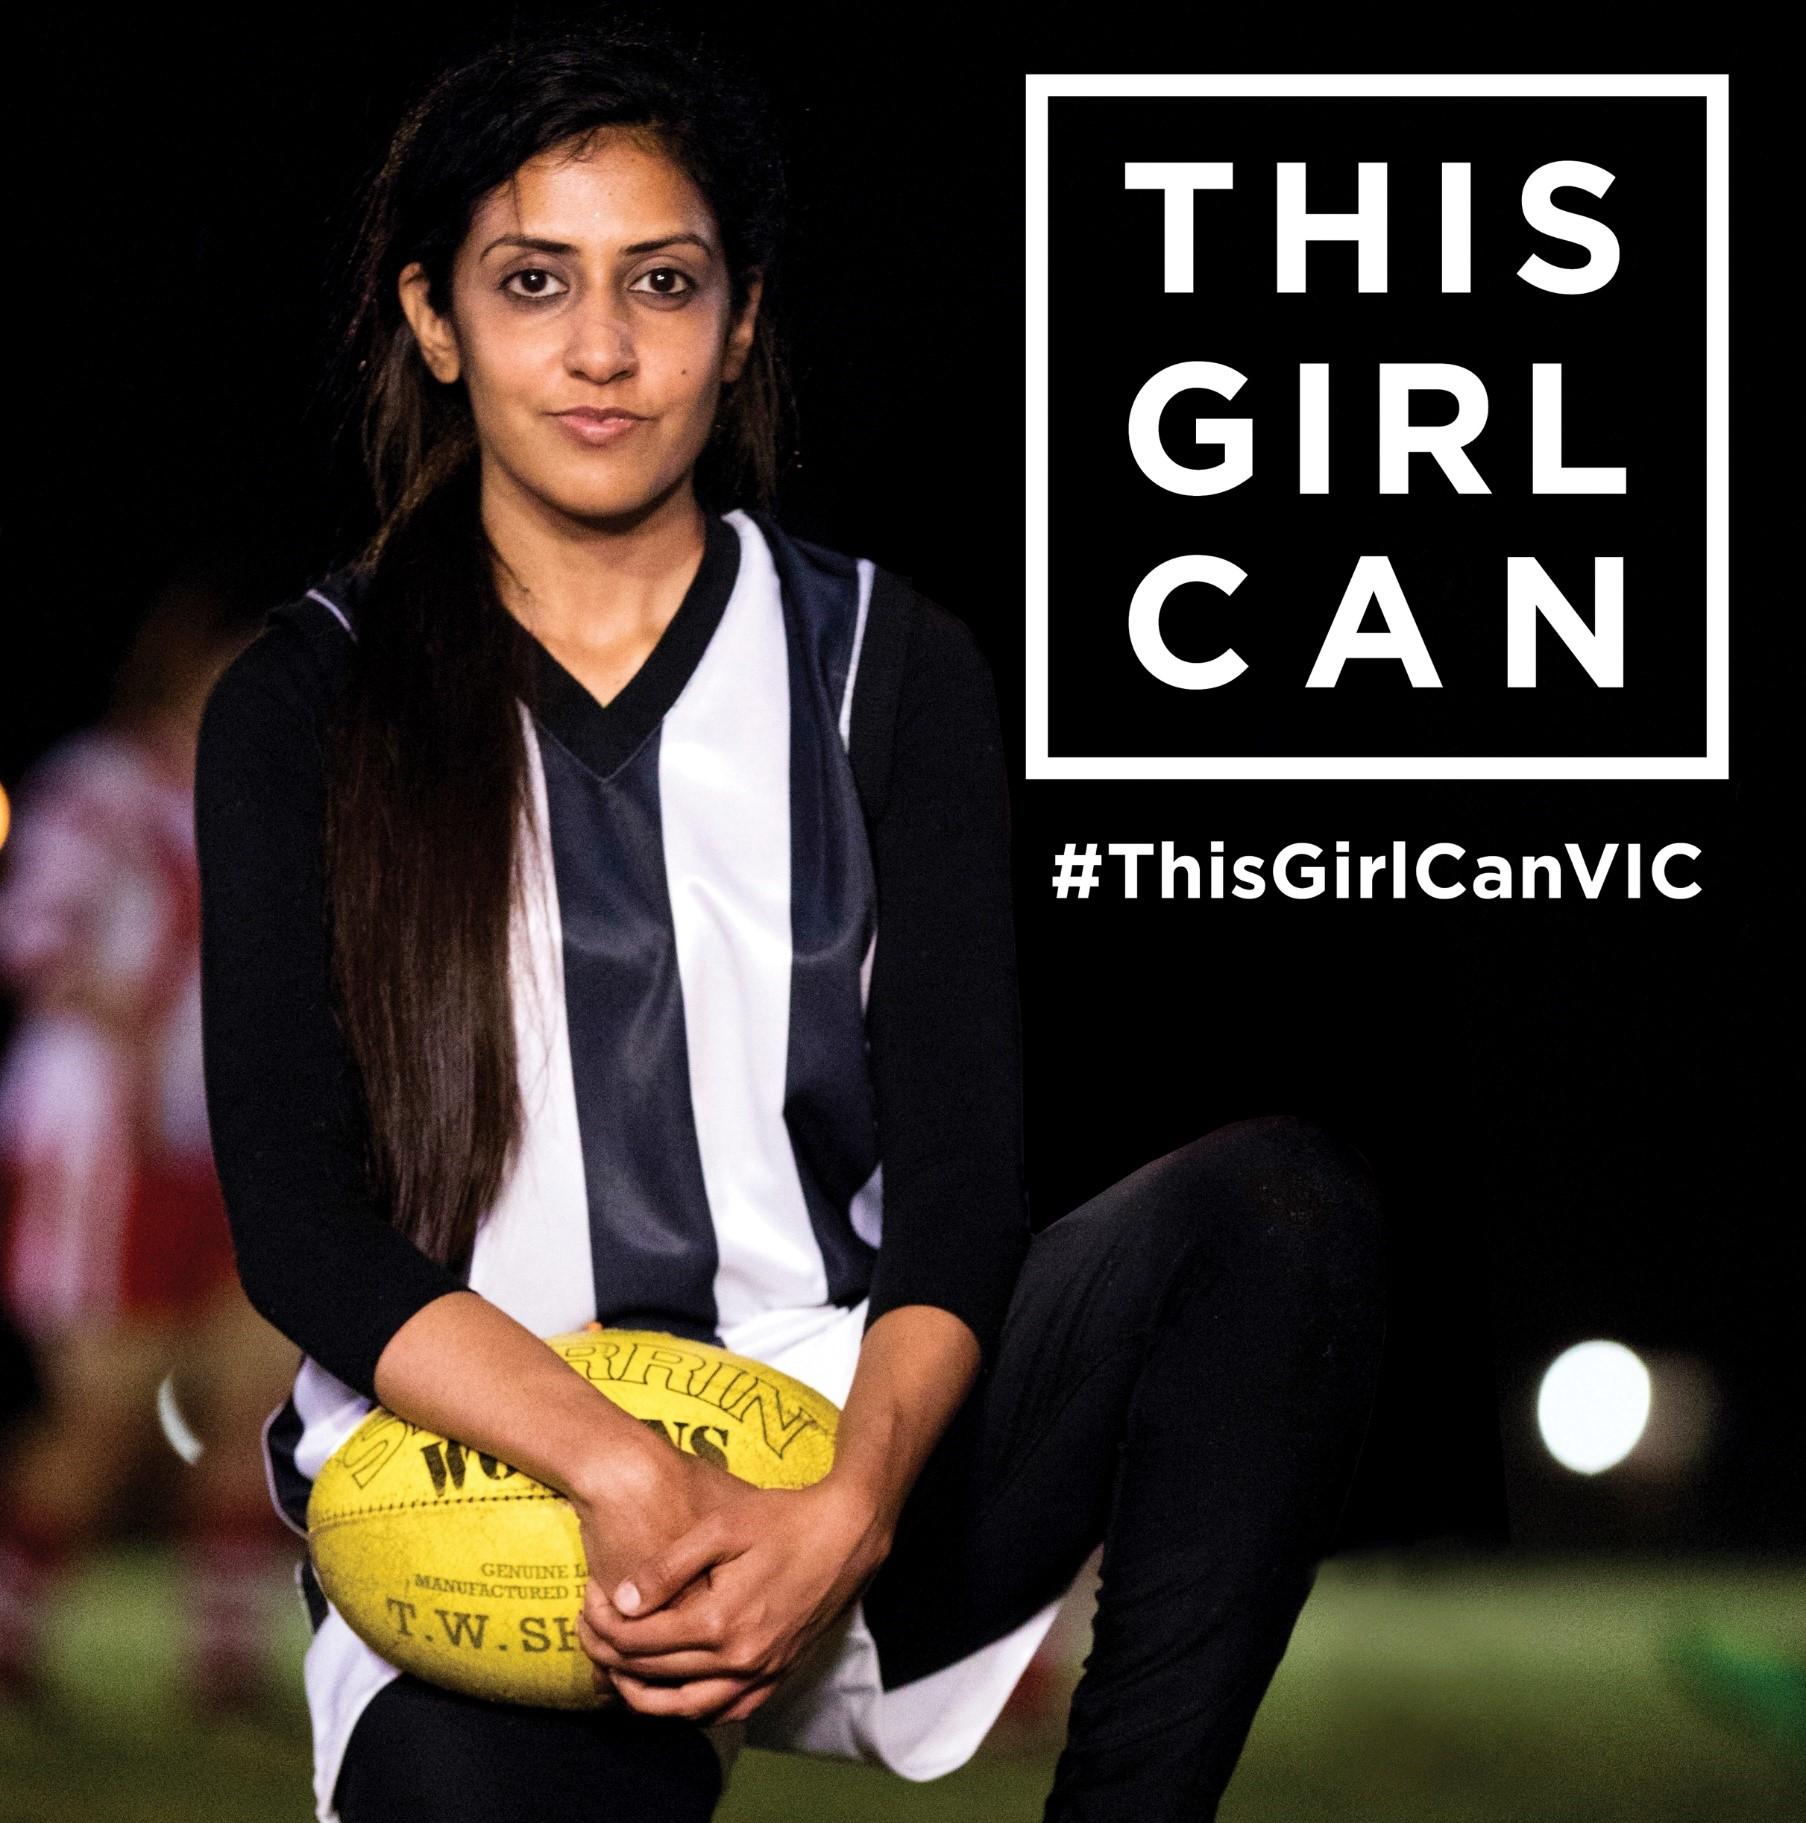 Football - This Girl Can